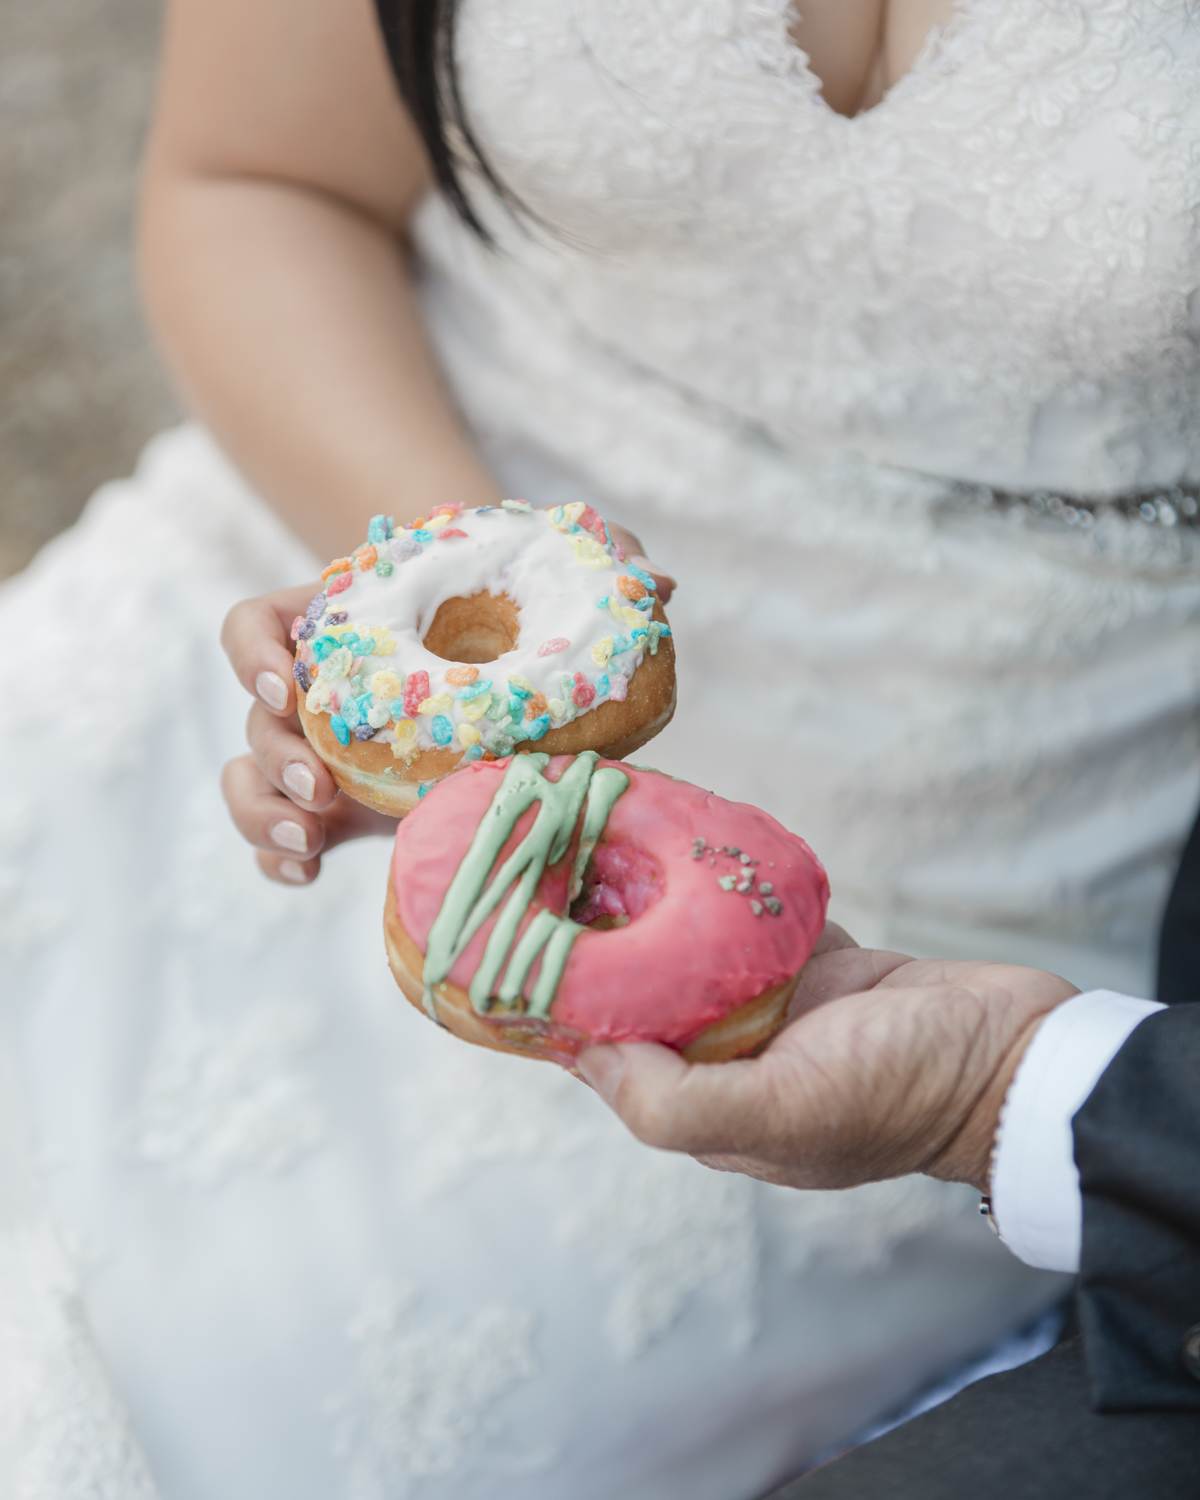 Elopement in Banff National Park eating donuts post champagne pop